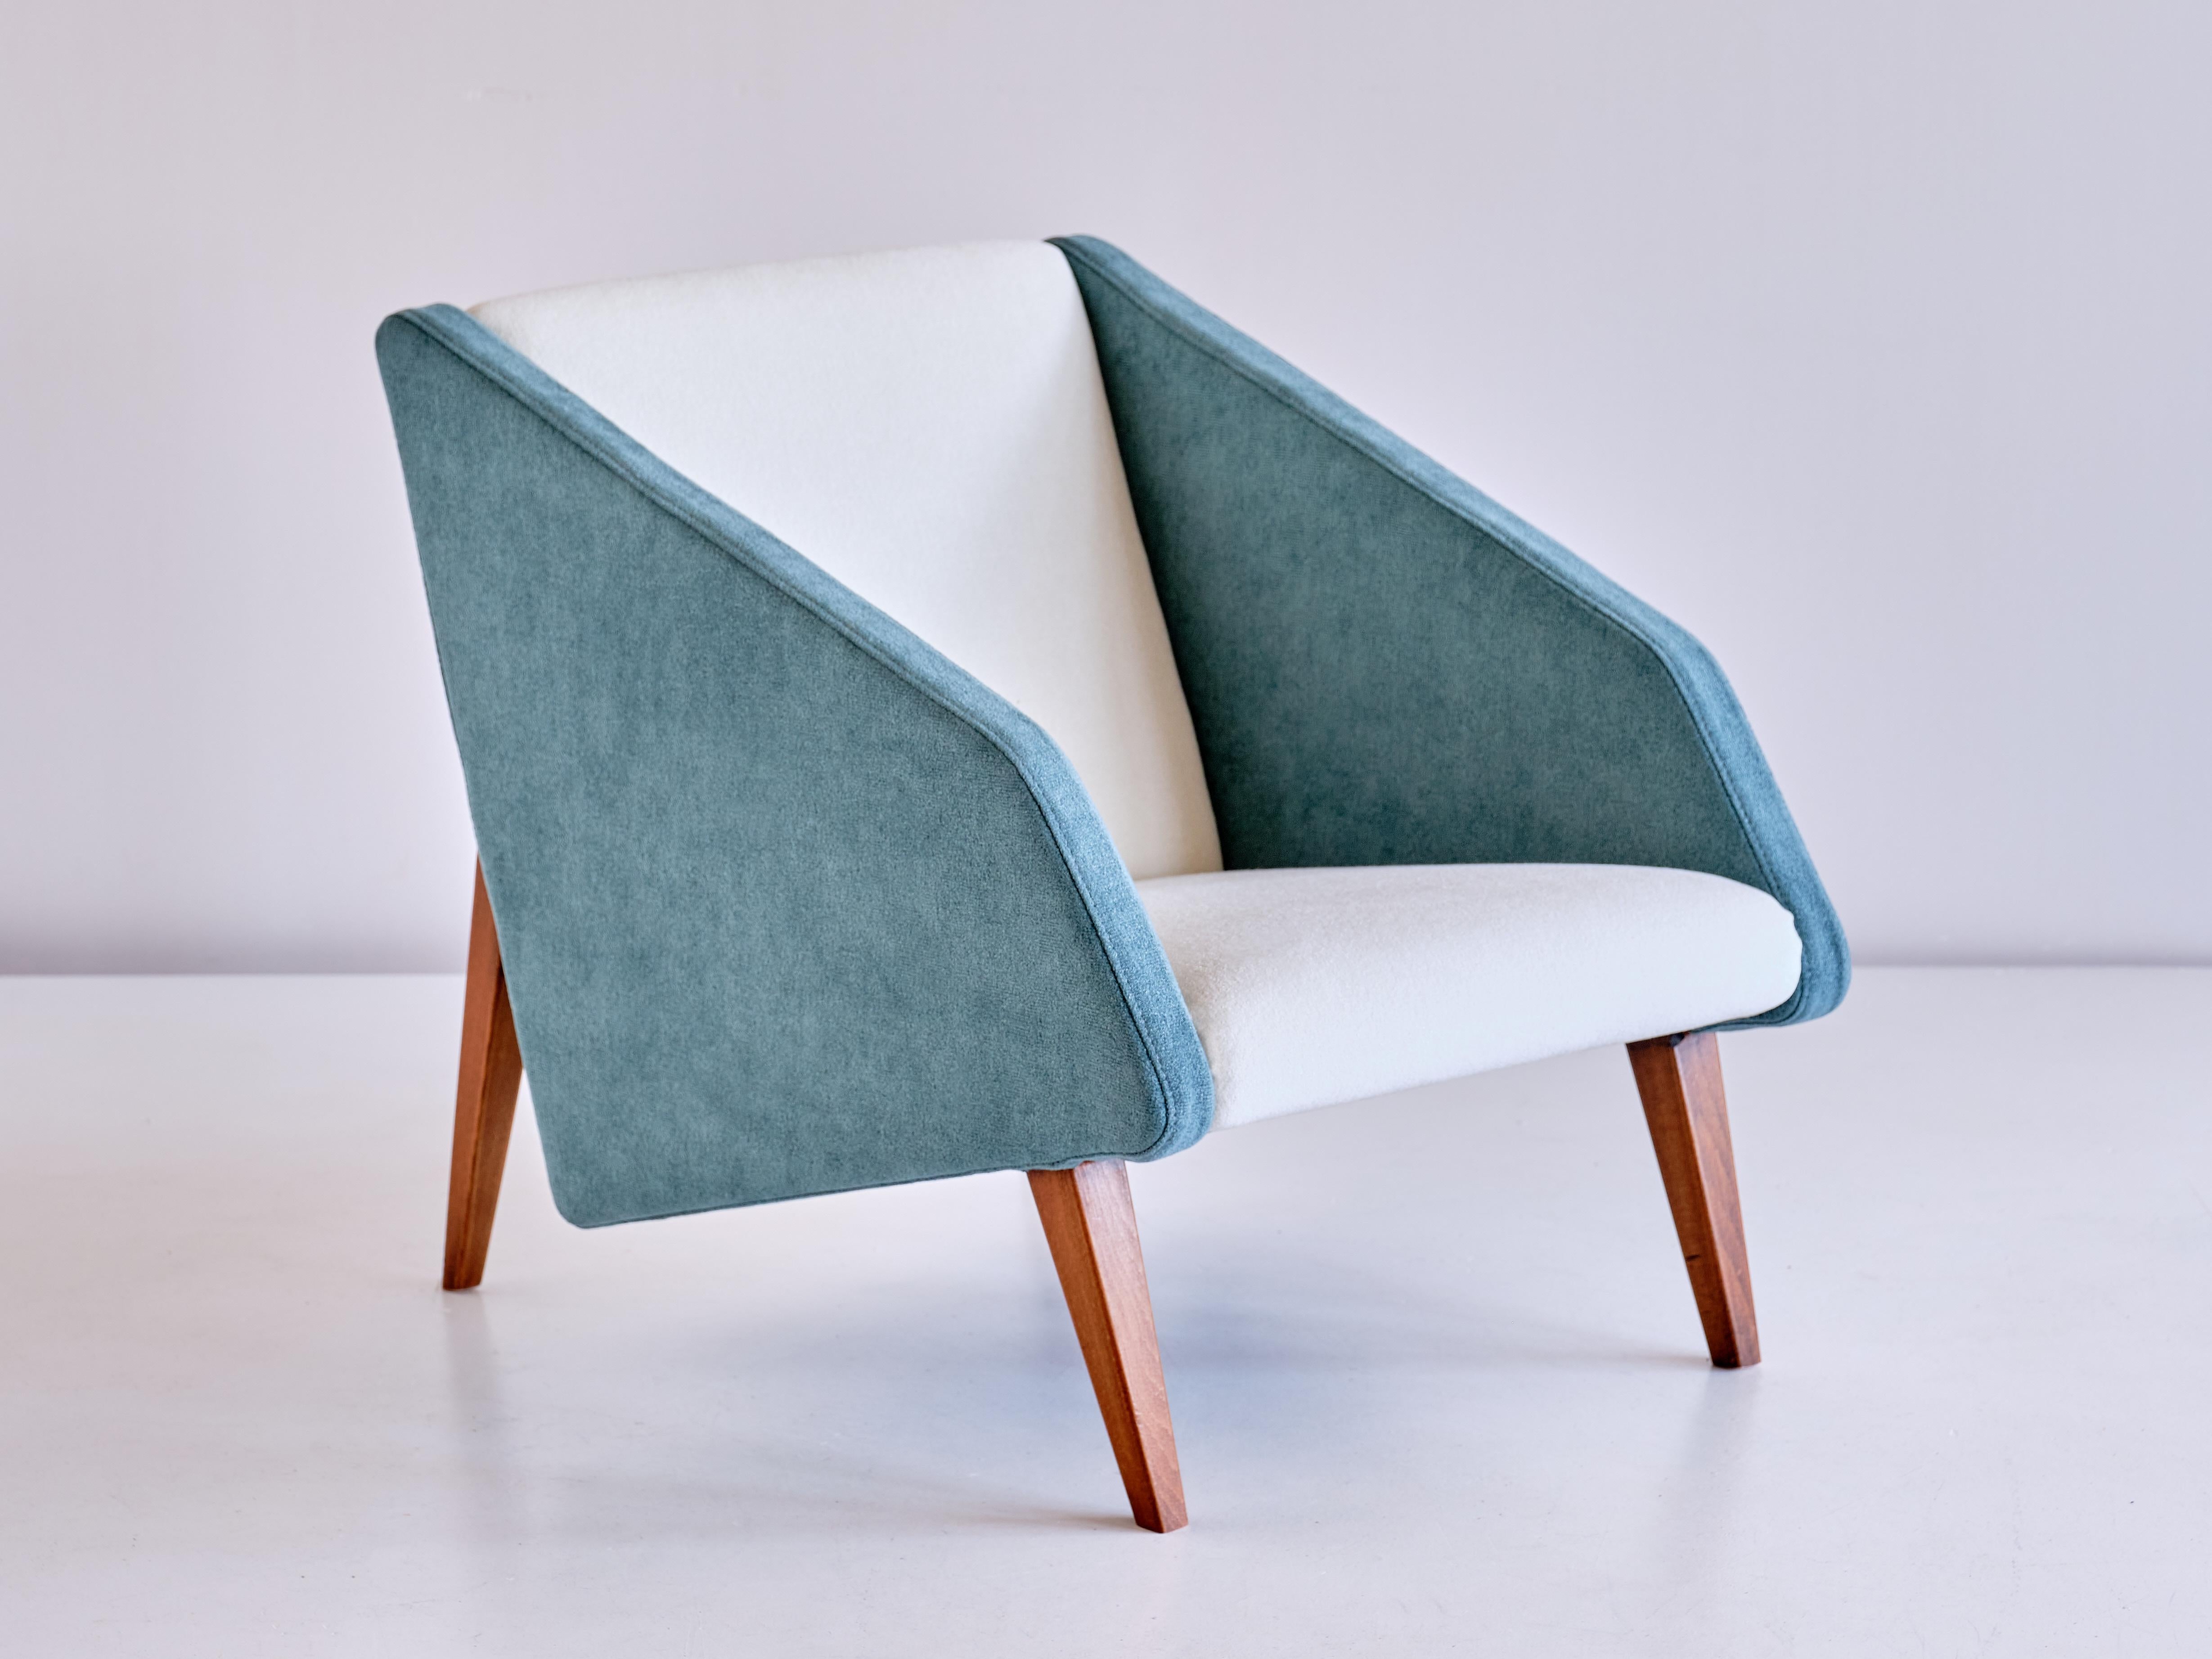 Gio Ponti Attributed Armchair in Lelièvre Fabric and Beech, Italy, Late, 1950s For Sale 4